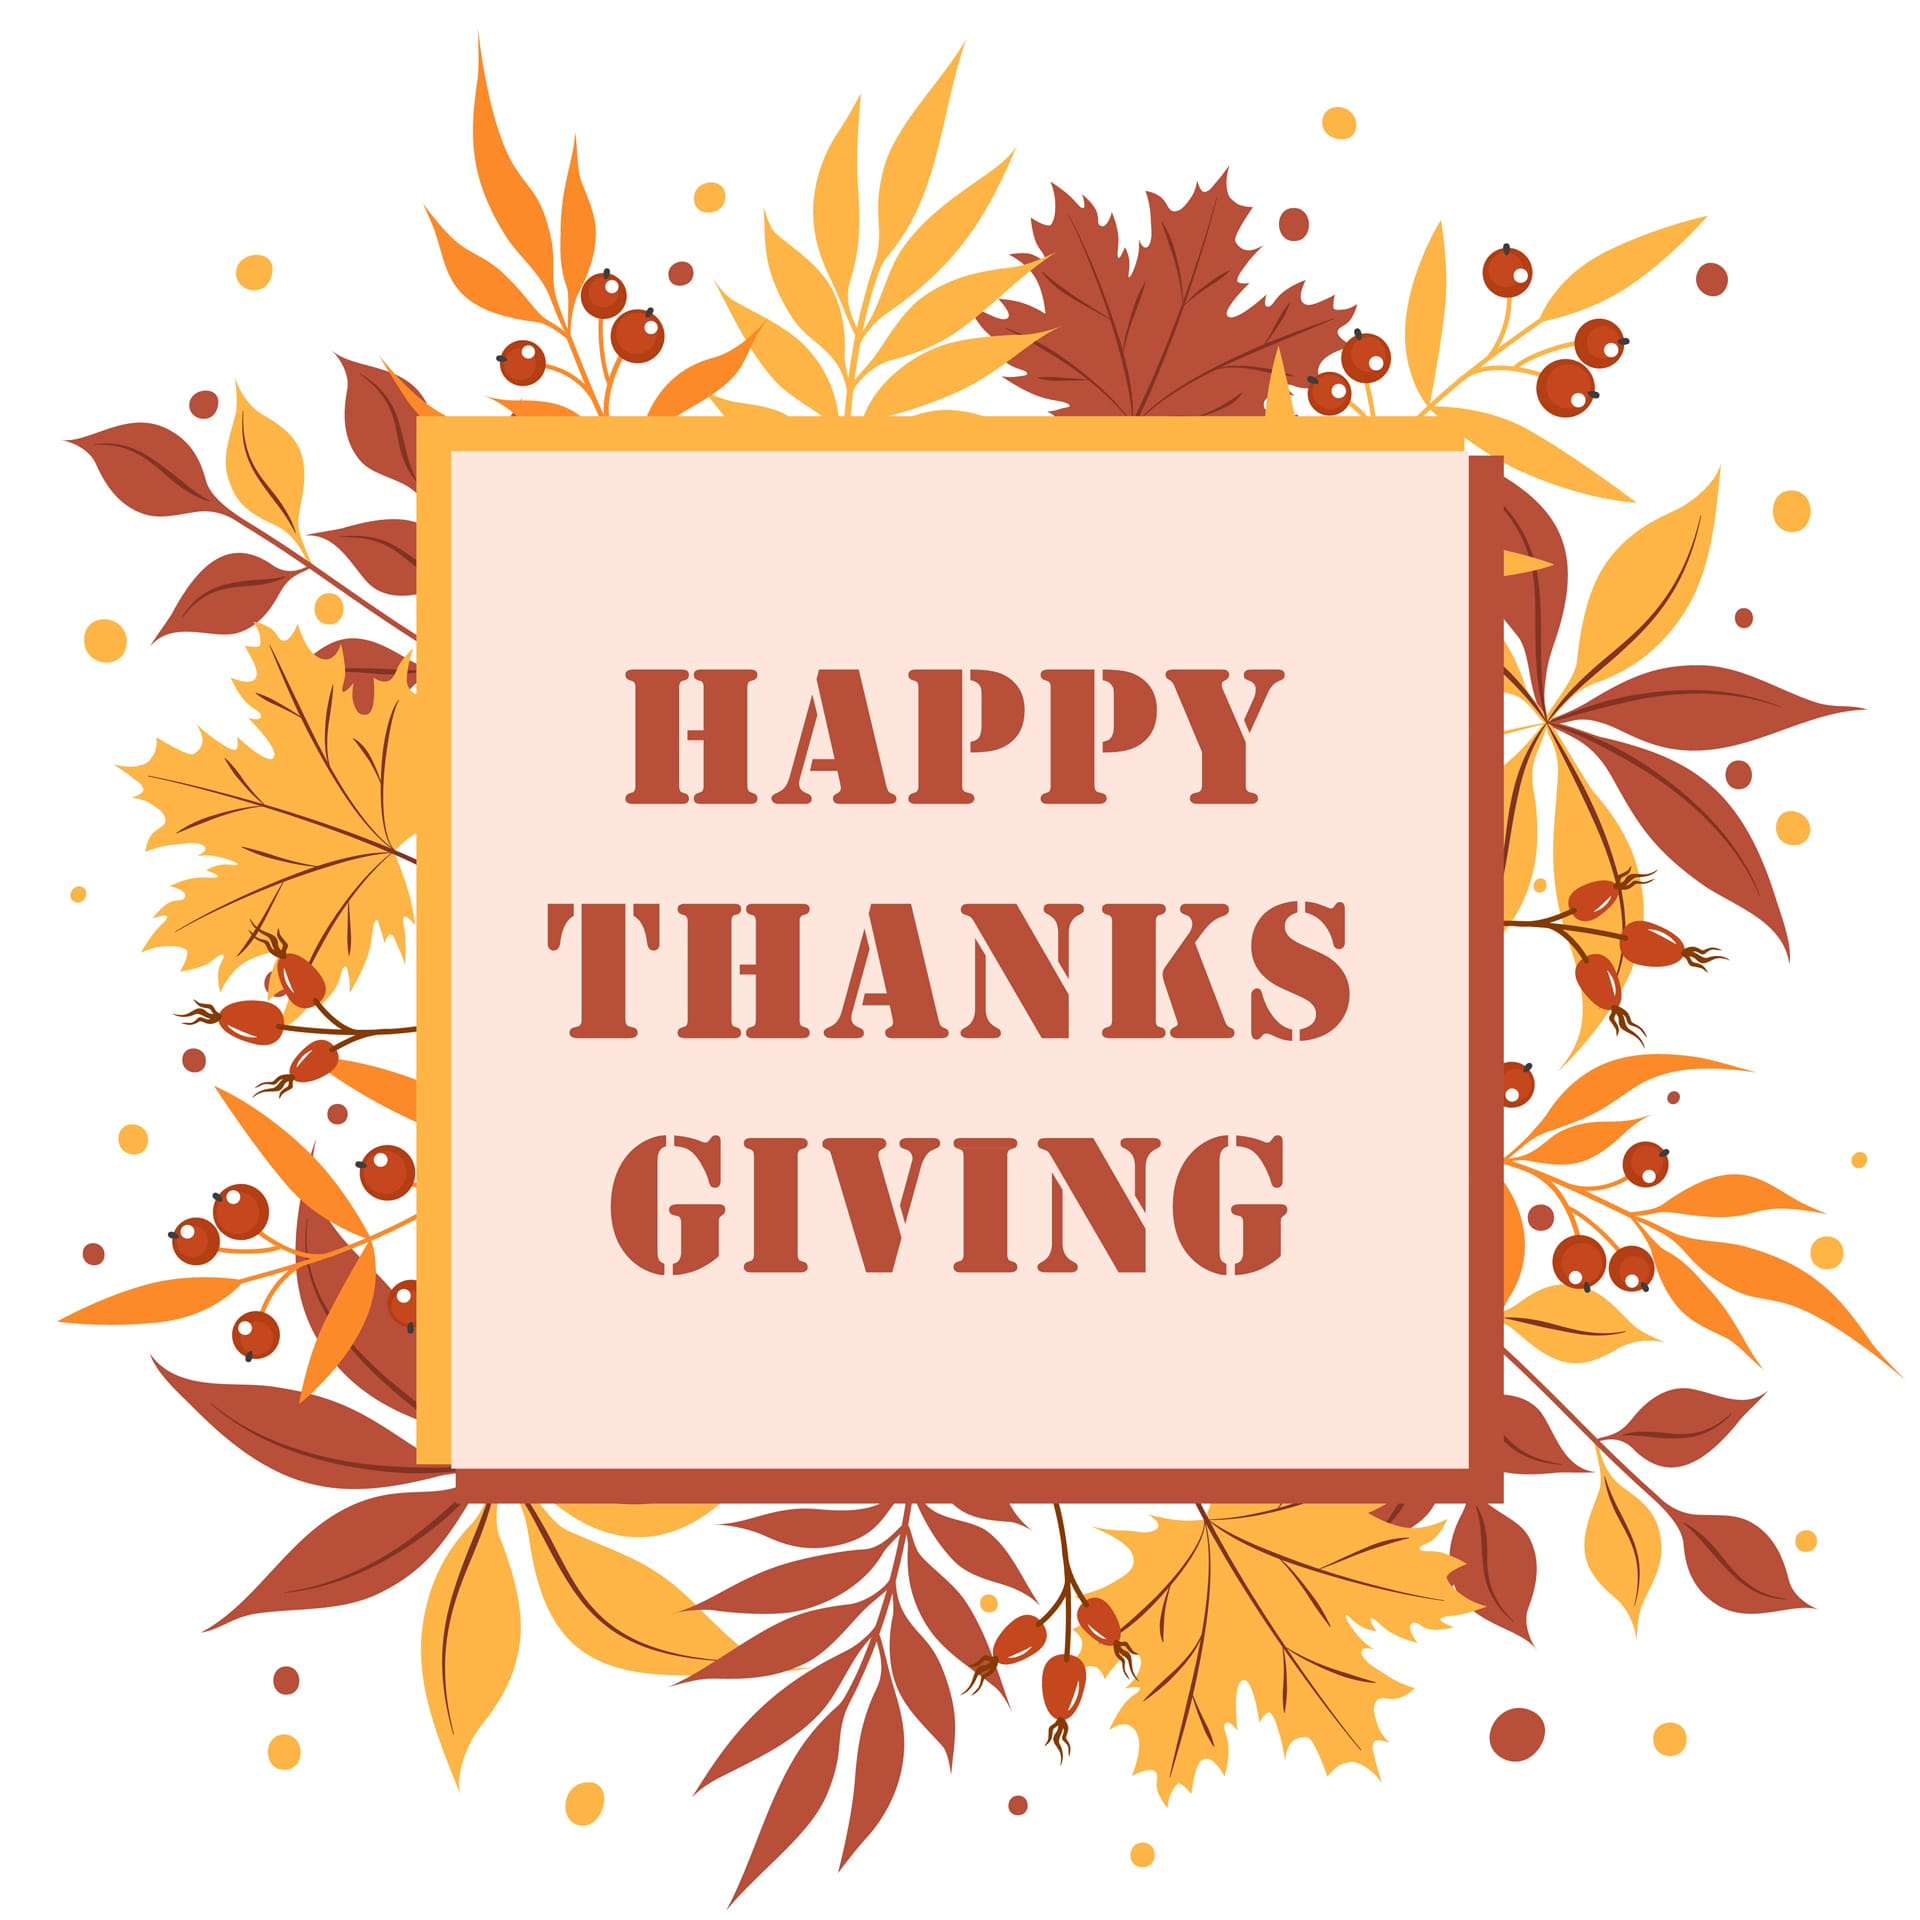 Lettering thanksgiving with beautiful bright leaves white background image